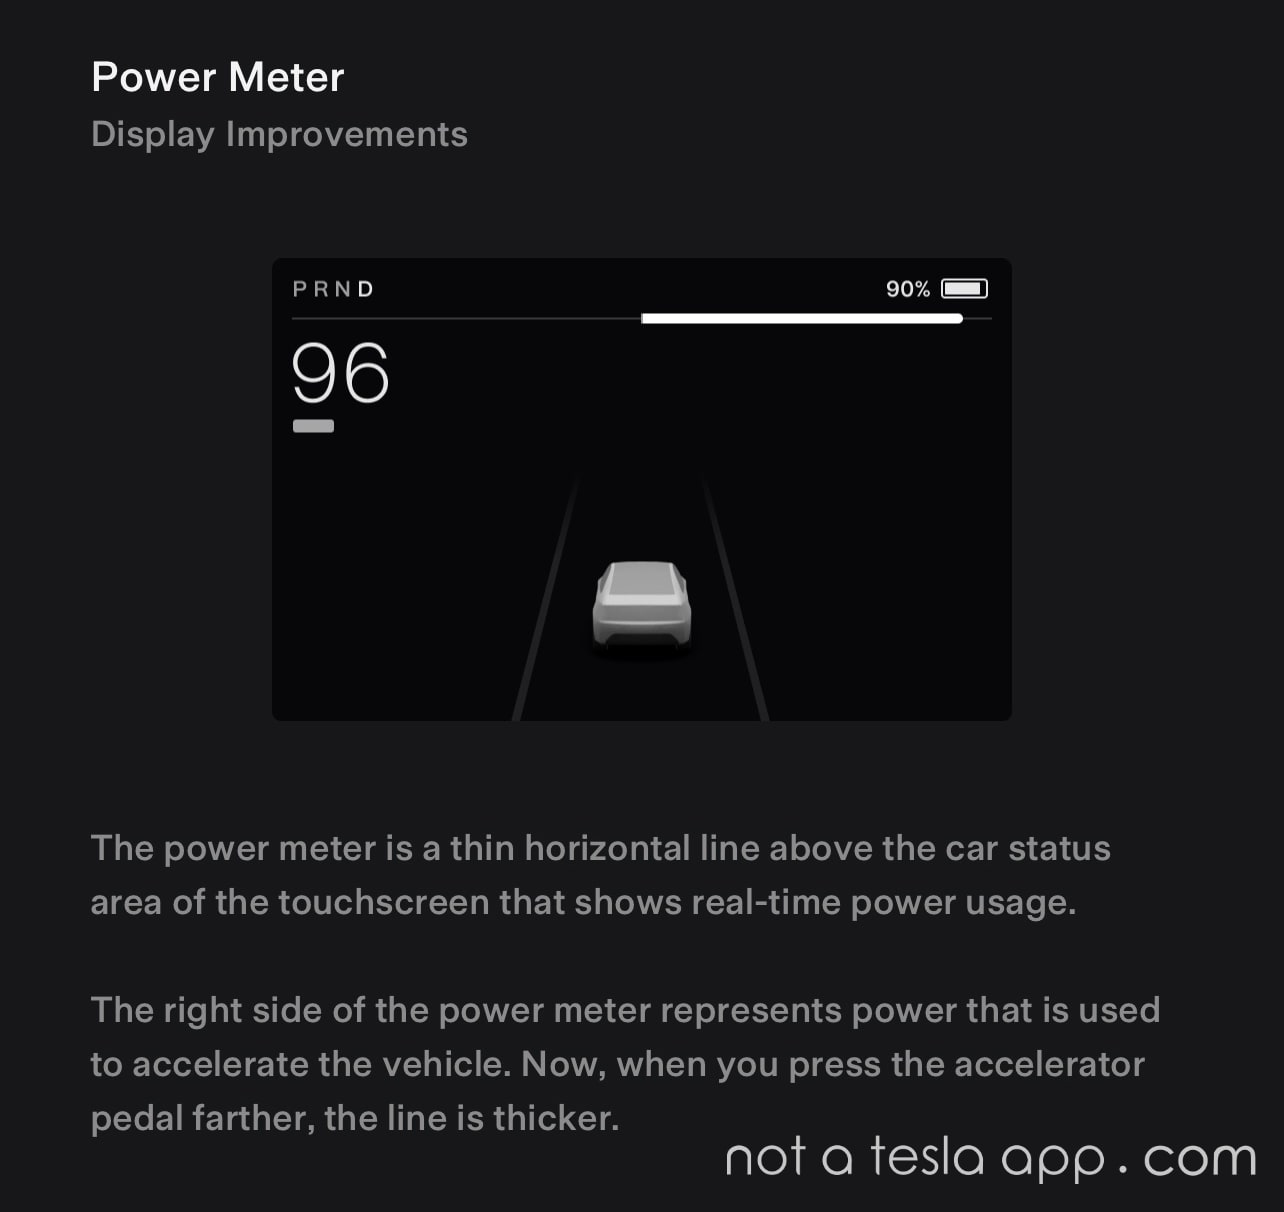 Tesla has improved the power meter in the vehicle through several updates